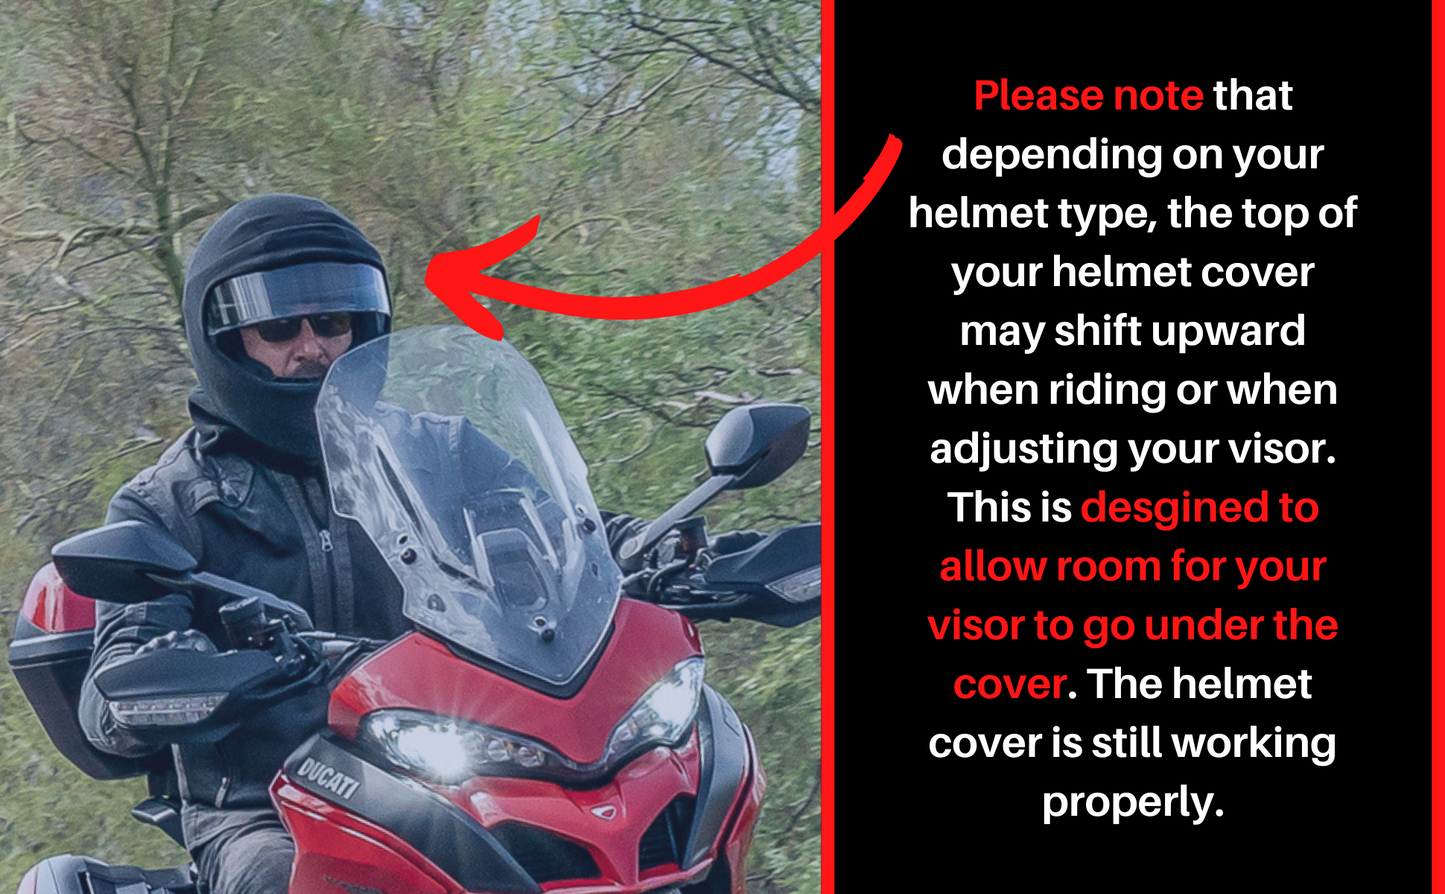 Note that helmet cover may shift upward when adjusting visor, it is still working properly and is designed this way on purpose